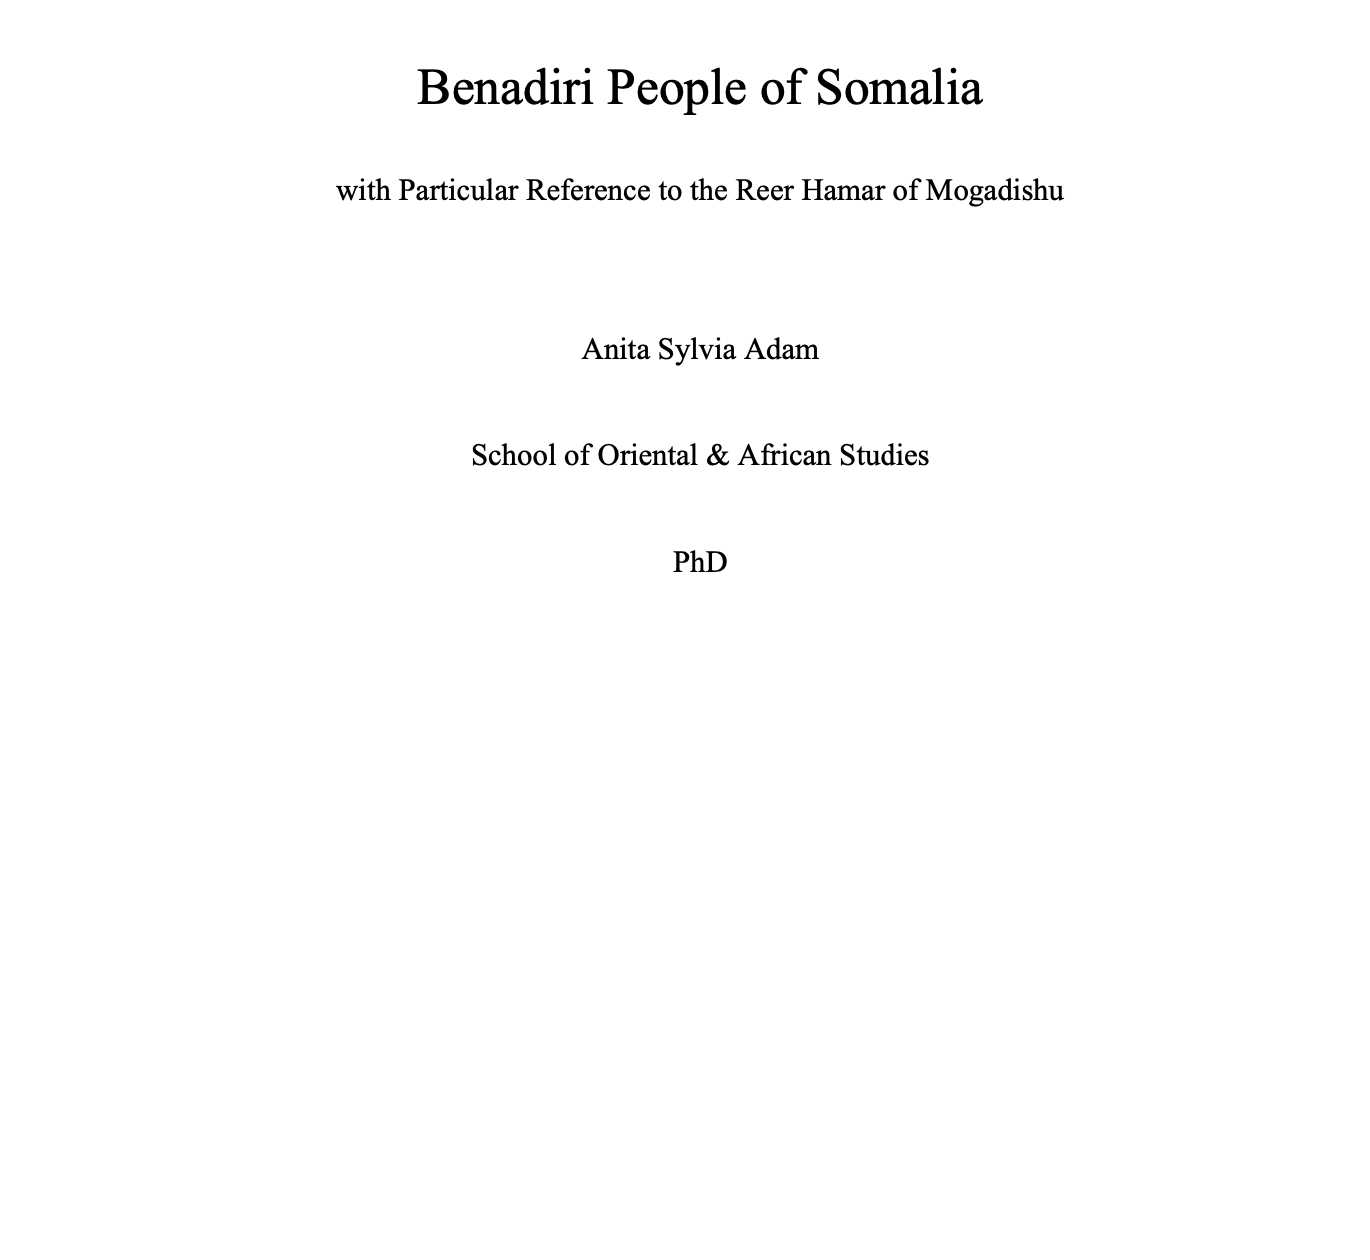 Banadiri People of Somalia with Particular Reference to the Reer Hamar of Mogadishu